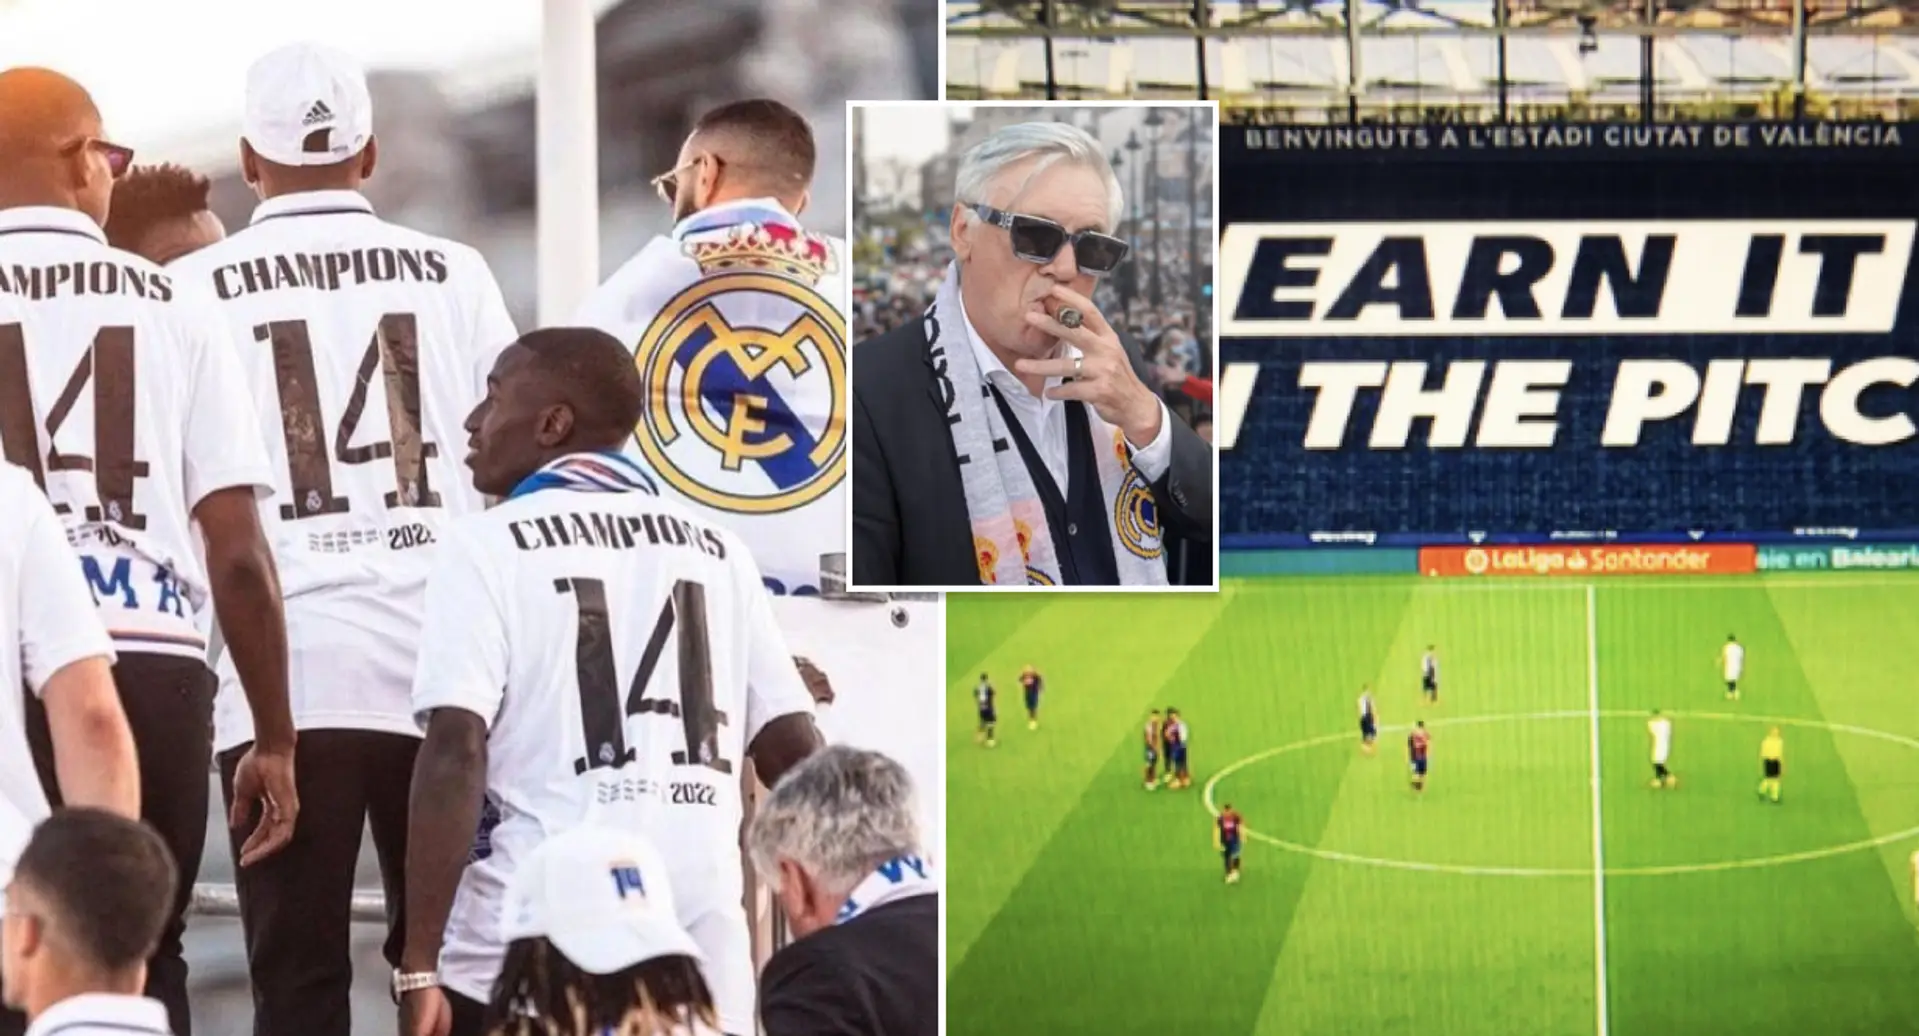 'There isn't a club who earned it more: Real Madrid fans react to UEFA's anti-Super League campaign